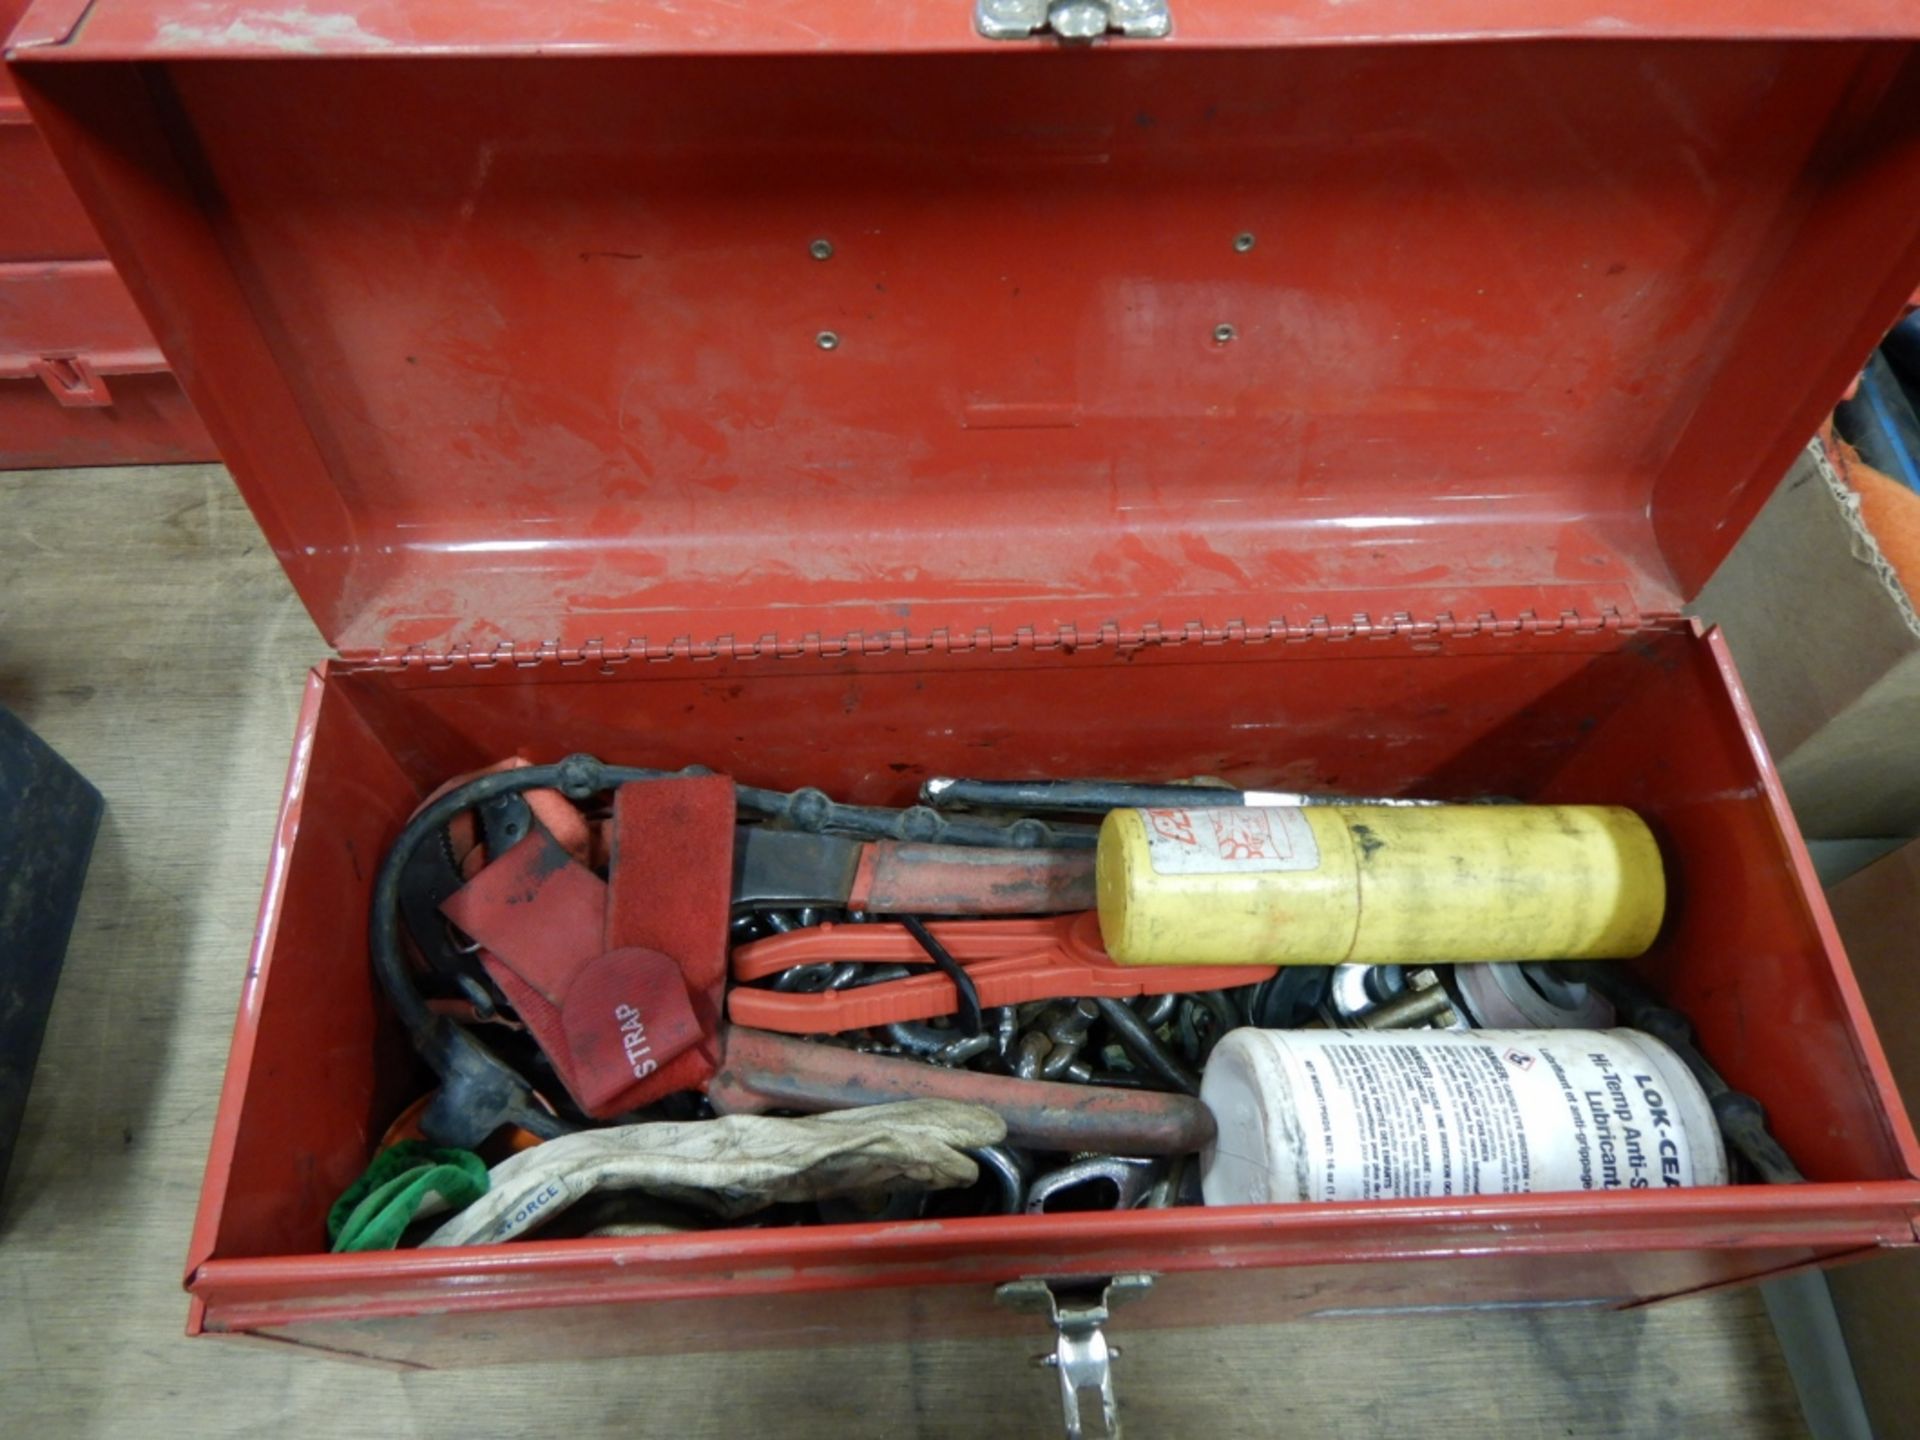 MASTERCRAFT STEEL AND 2-POLY TOOLBOXES W/ ASSORTED WRENCHES, PLIERS, HAND TOOLS, ETC. - Image 3 of 3